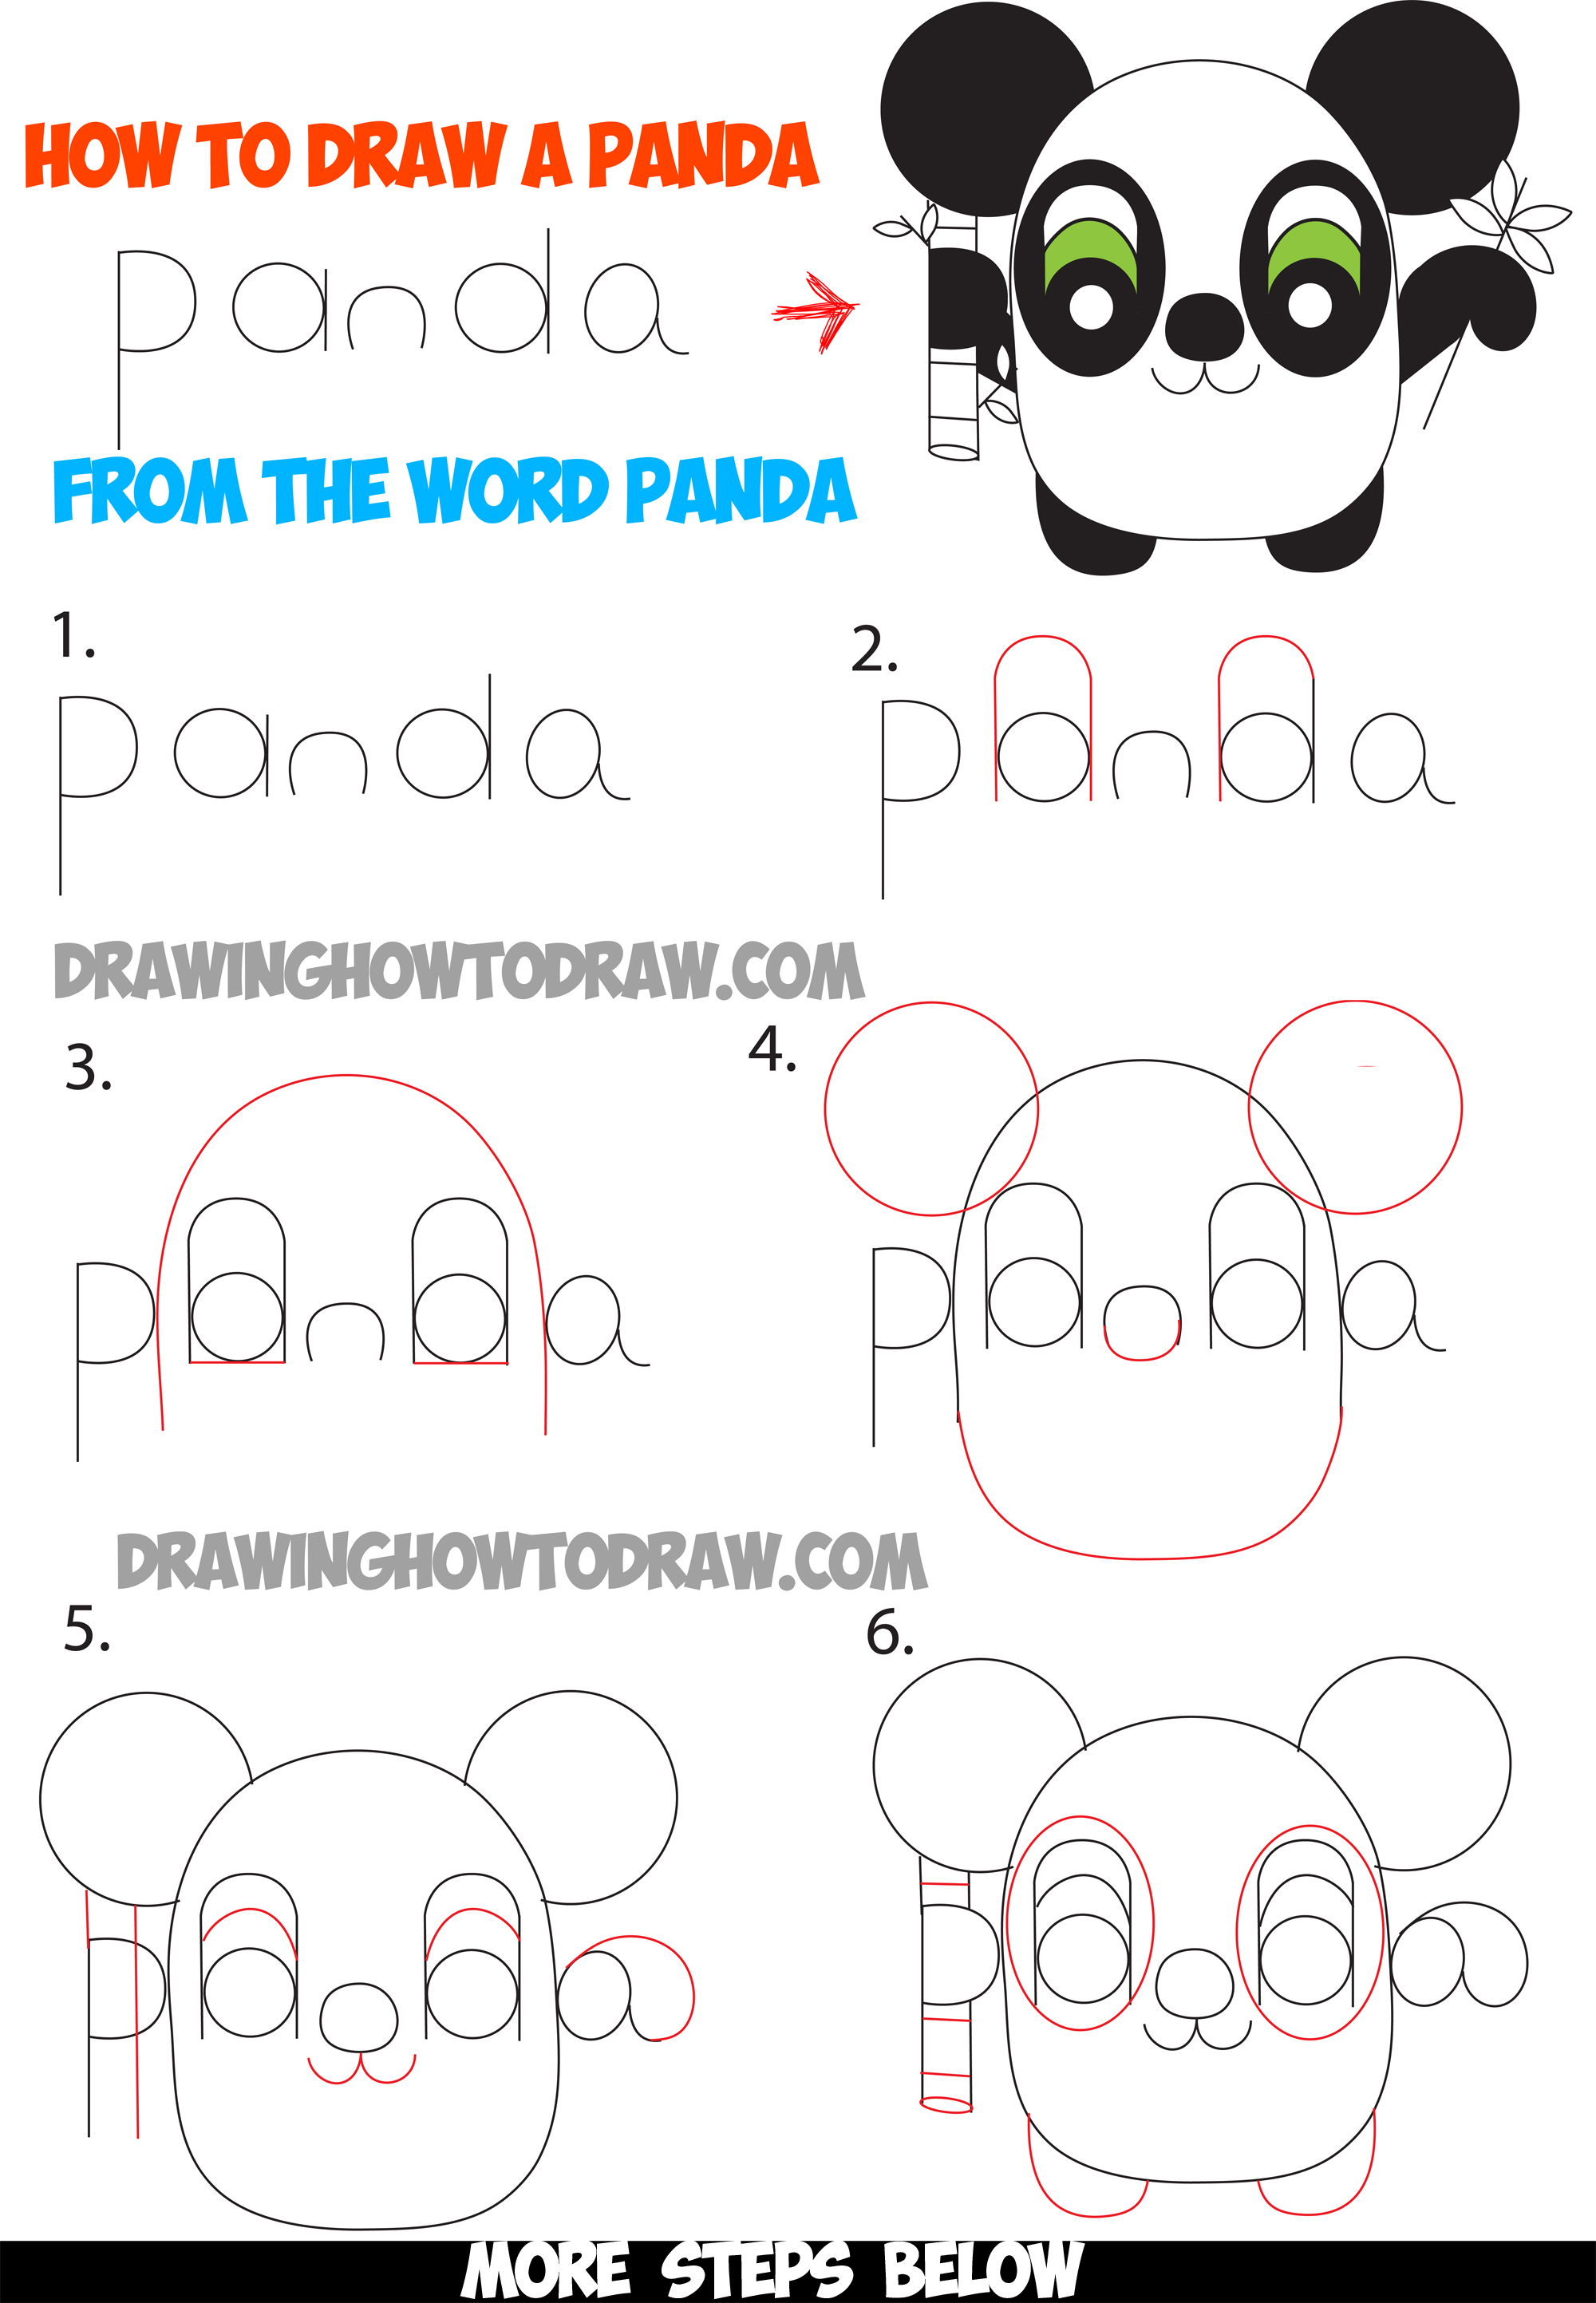 How To Draw A Panda Step By Step Guide - Riset